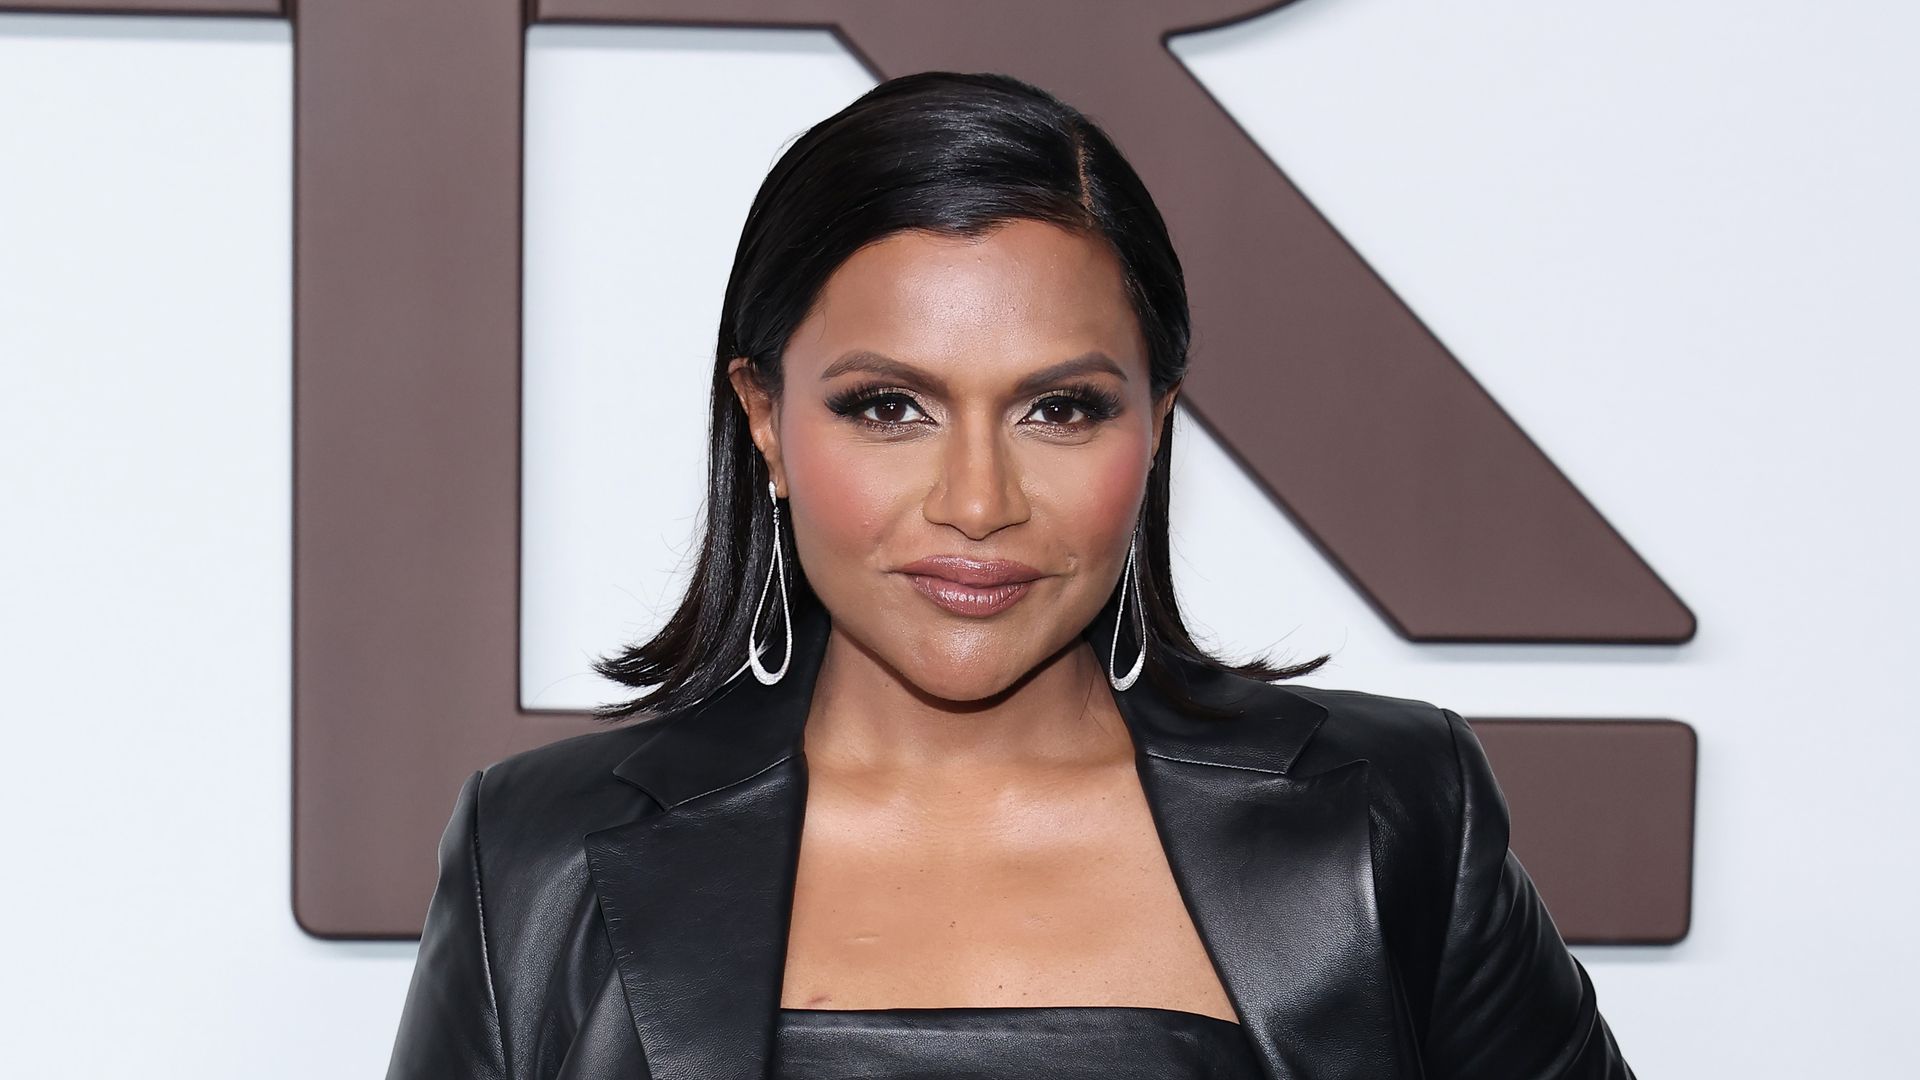 Mindy Kaling reveals the one part of her daily diet she'd consider 'most off-putting'